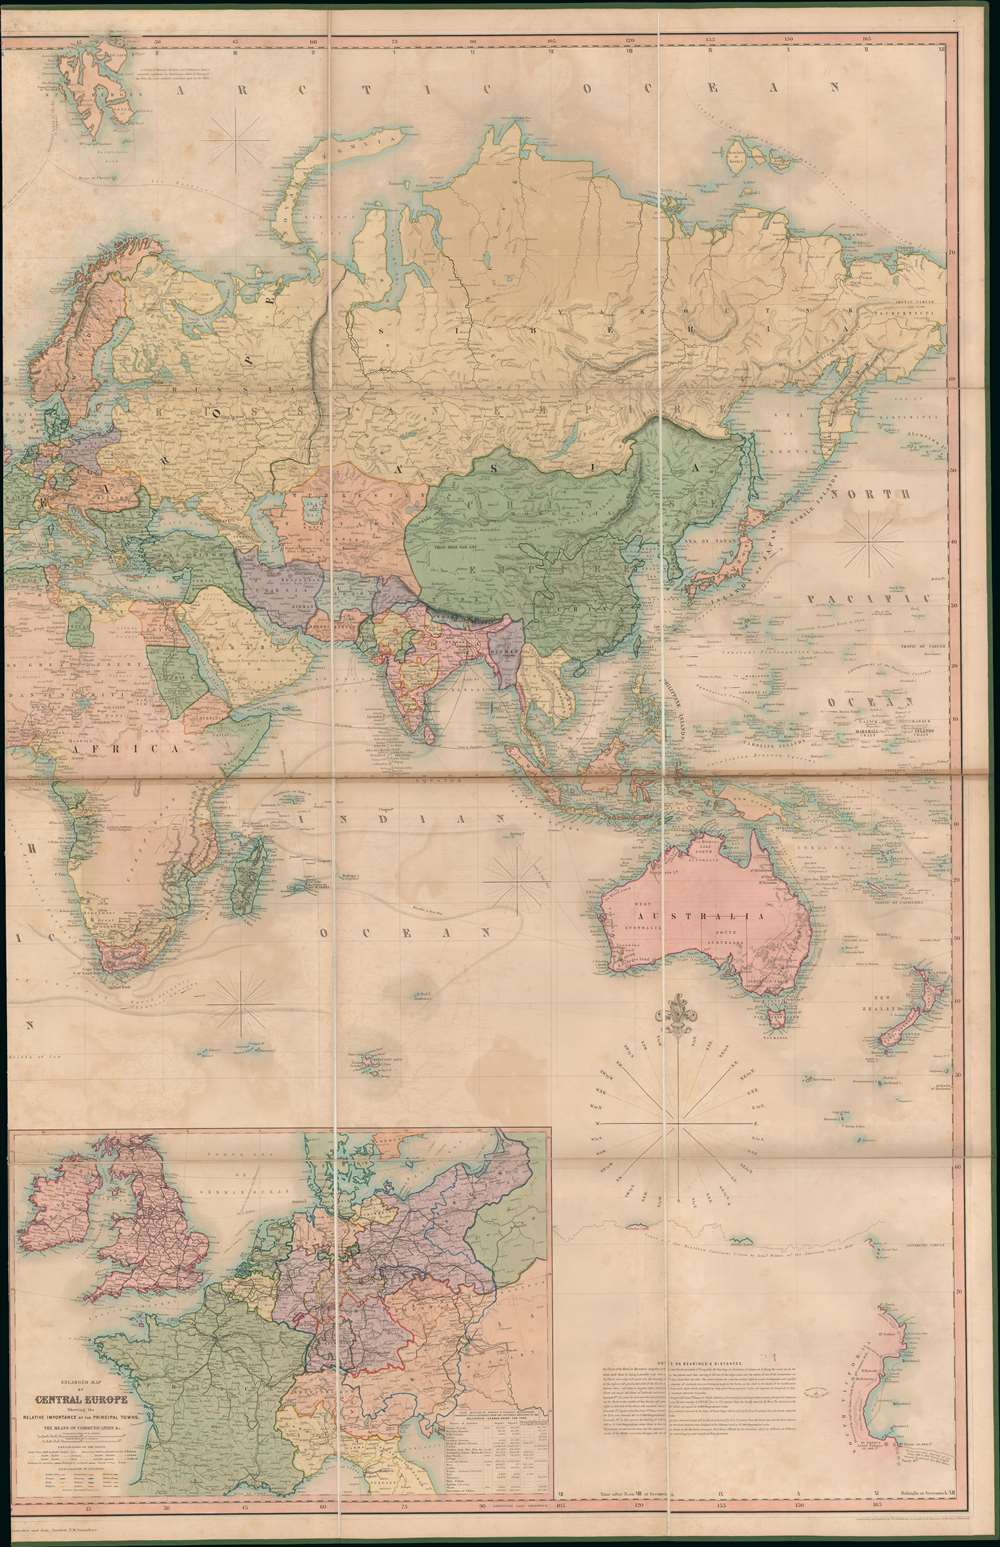 Johnstons' Commercial Chart of the World on Mercators Projection from the latest and Best Authorities Containing the Position of Every Place of Commercial Importance, Shhowing the Princial Currents of hte Ocean with their Direction and Rate of Progress.  With an Enlarged Map of Central Europe Showing the Railway Communication between the Different Countries, and Distinguishing the States which compose the German Customs Union. - Alternate View 3